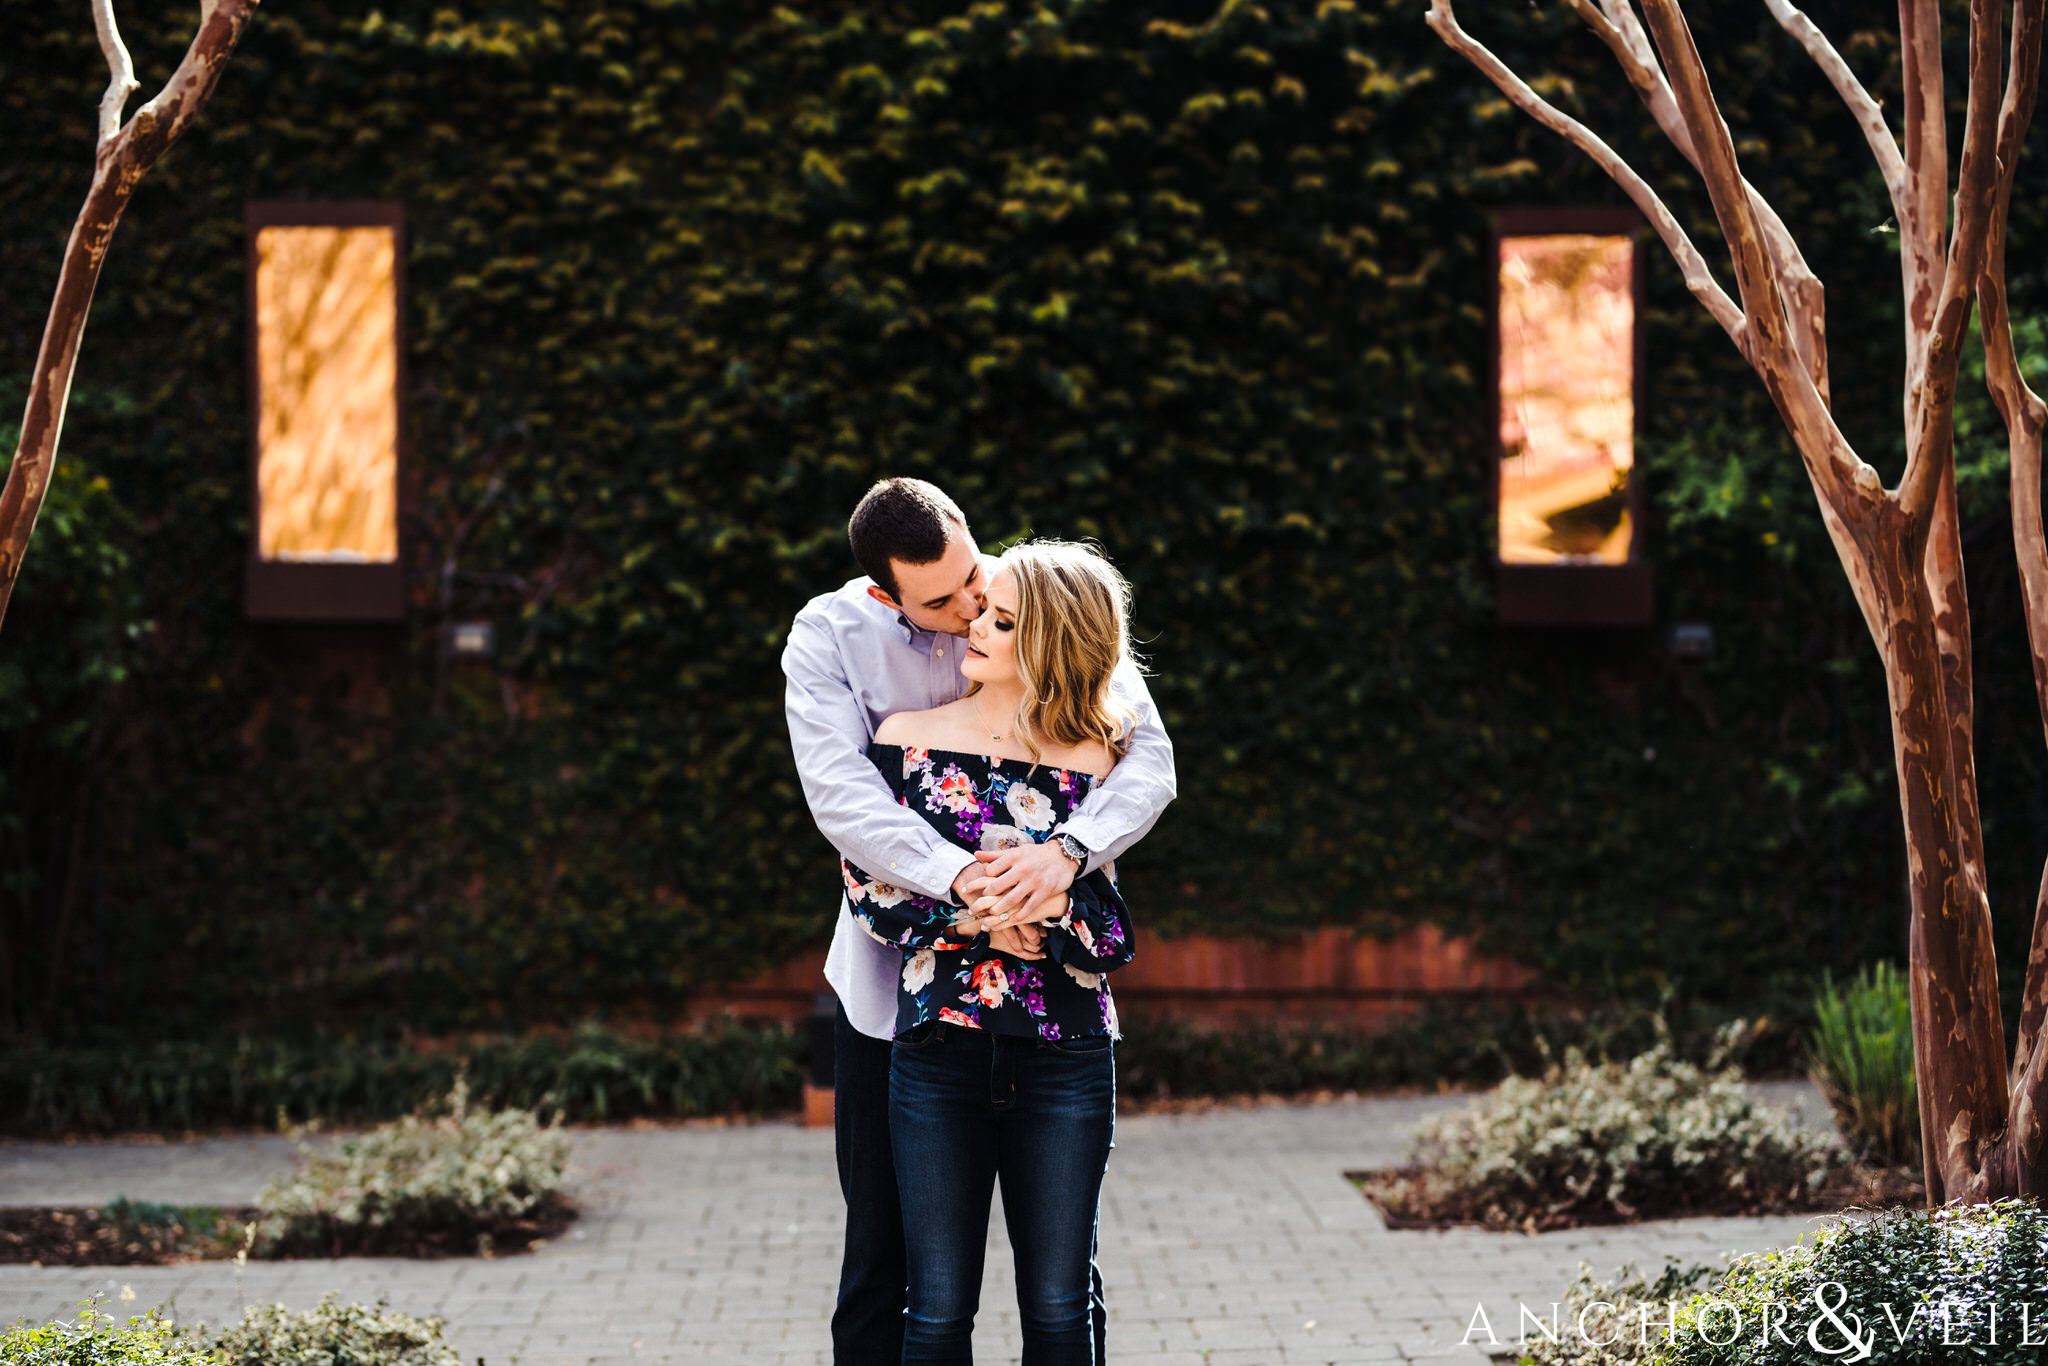 hugging tight during their Uptown Charlotte Engagment Session The Green 1